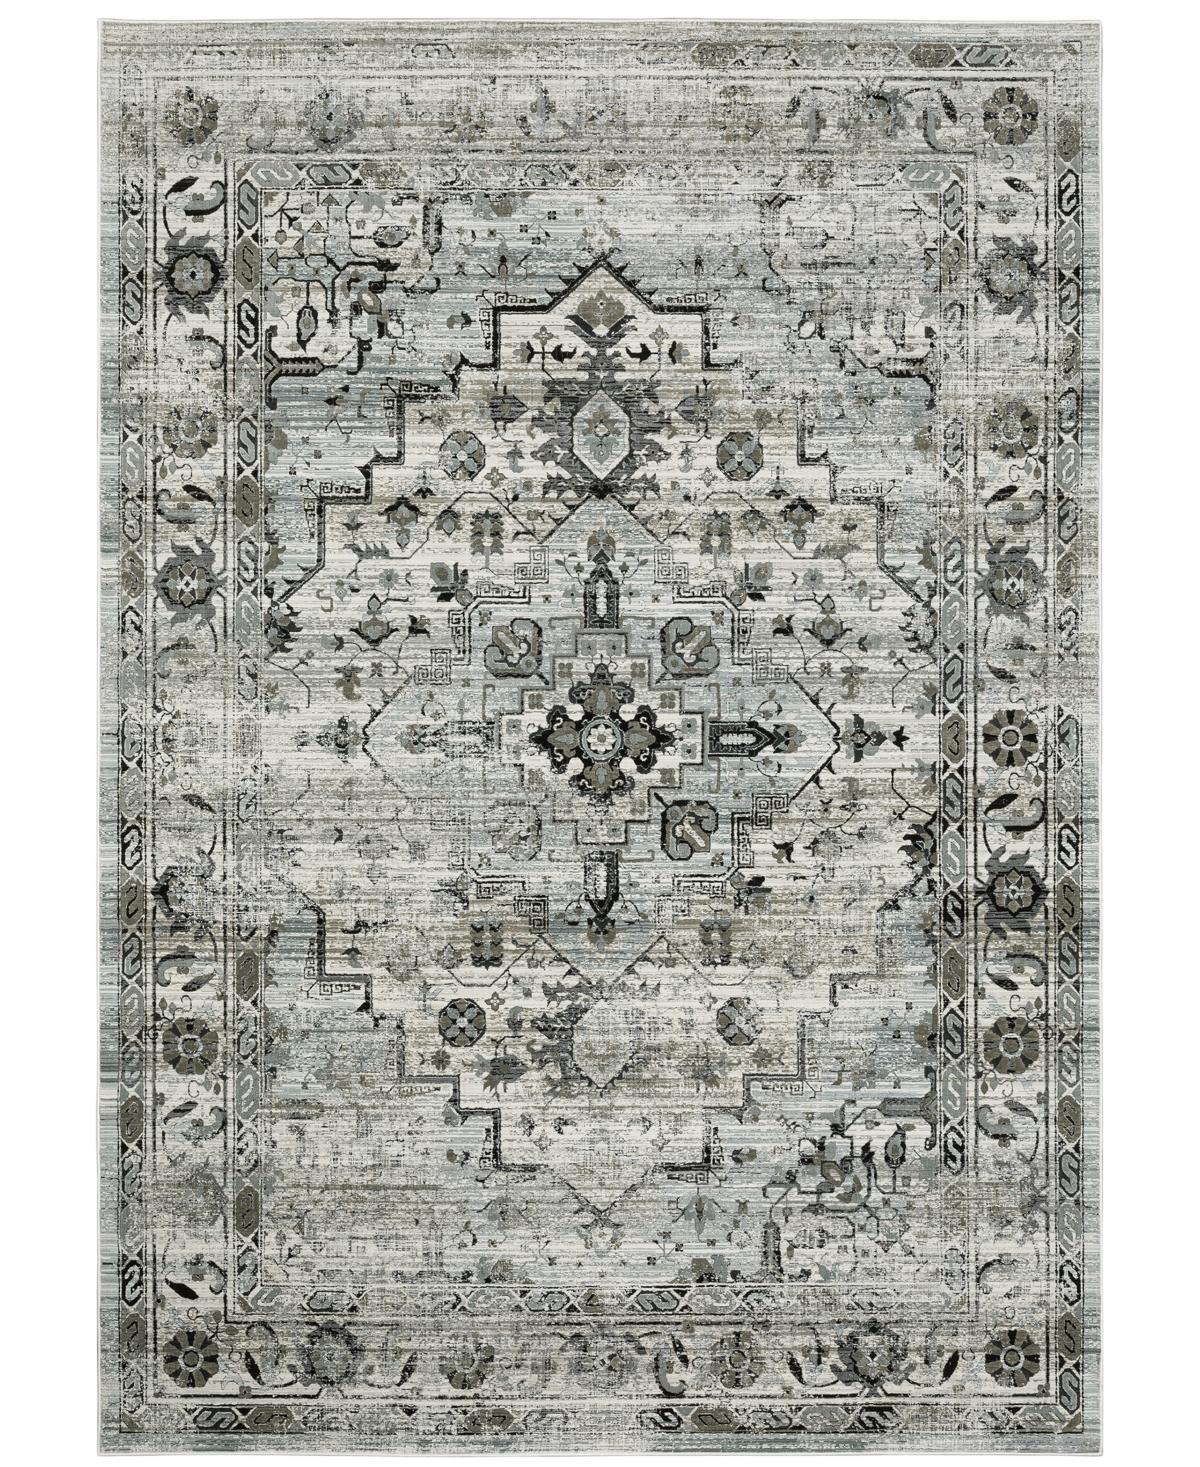 Km Home Astral 020ASL 9'10in x 12'10in Area Rug - Gray, Blue